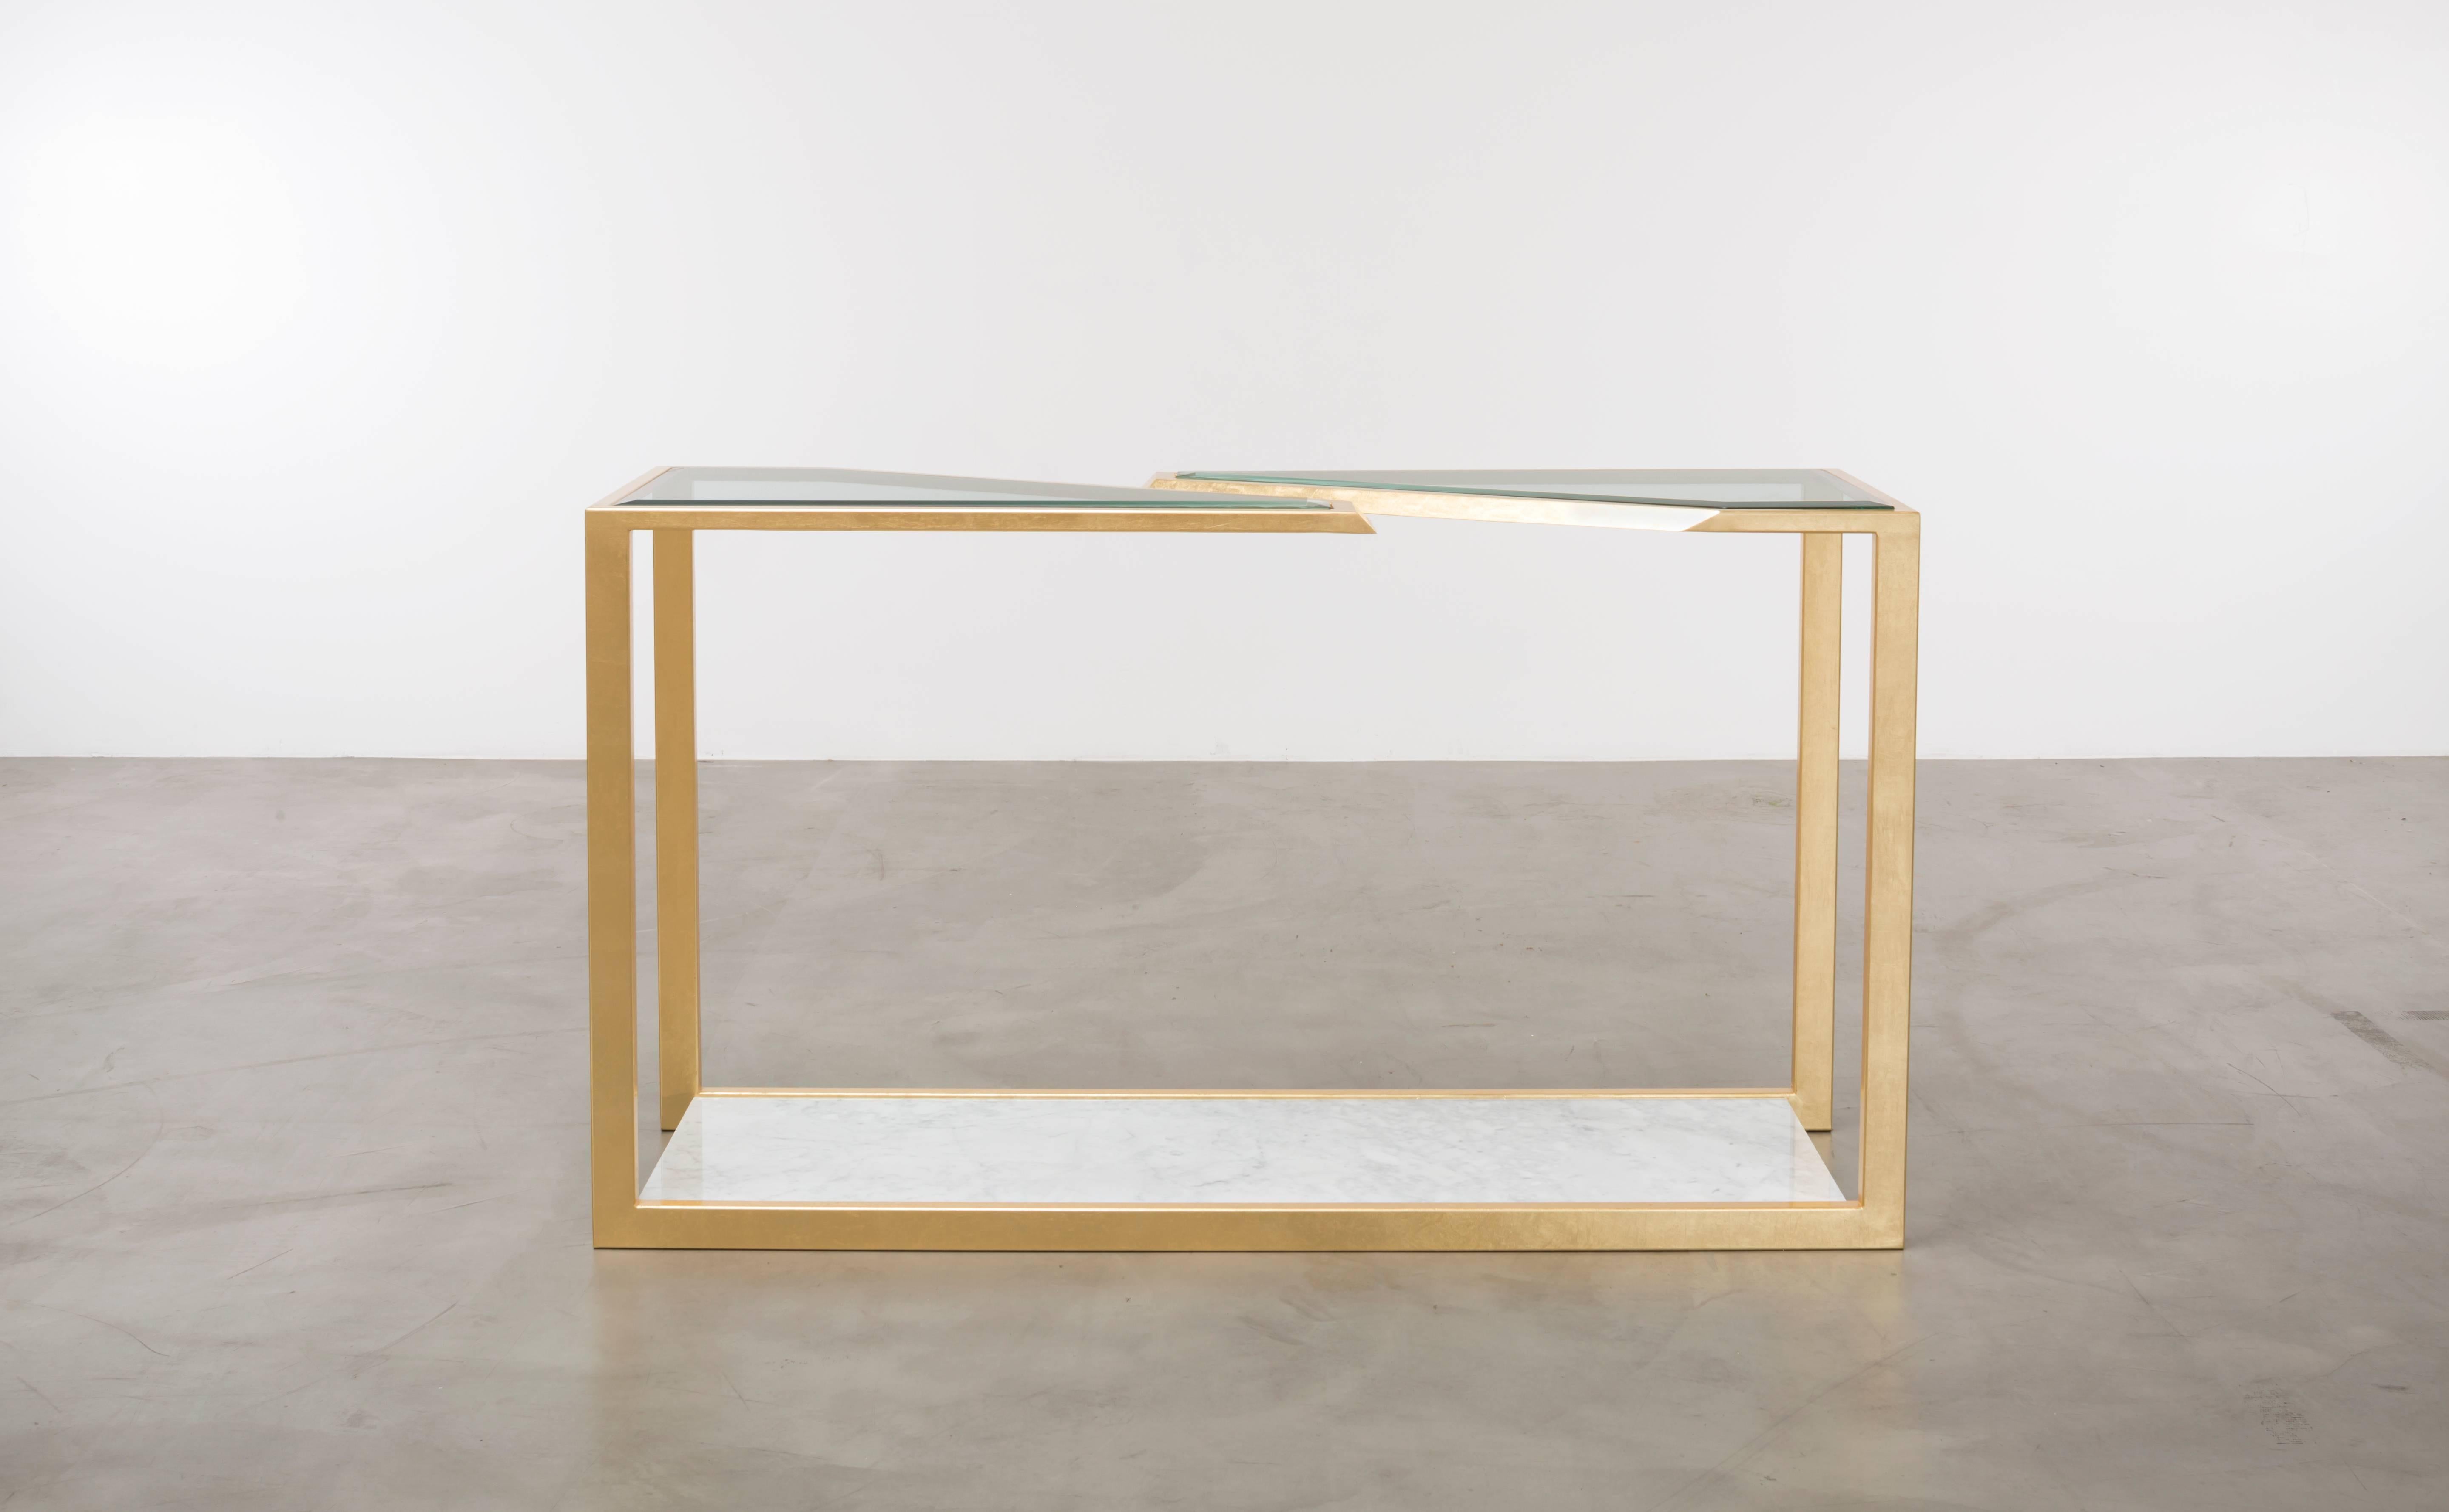 PIERRE CONSOLE TABLE - Modern Gold Leaf over Iron with Beveled Glass

Introducing the Pierre console table - a stunning modern piece that adds a touch of elegance and luxury to any space. Crafted with the utmost care and attention to detail, this